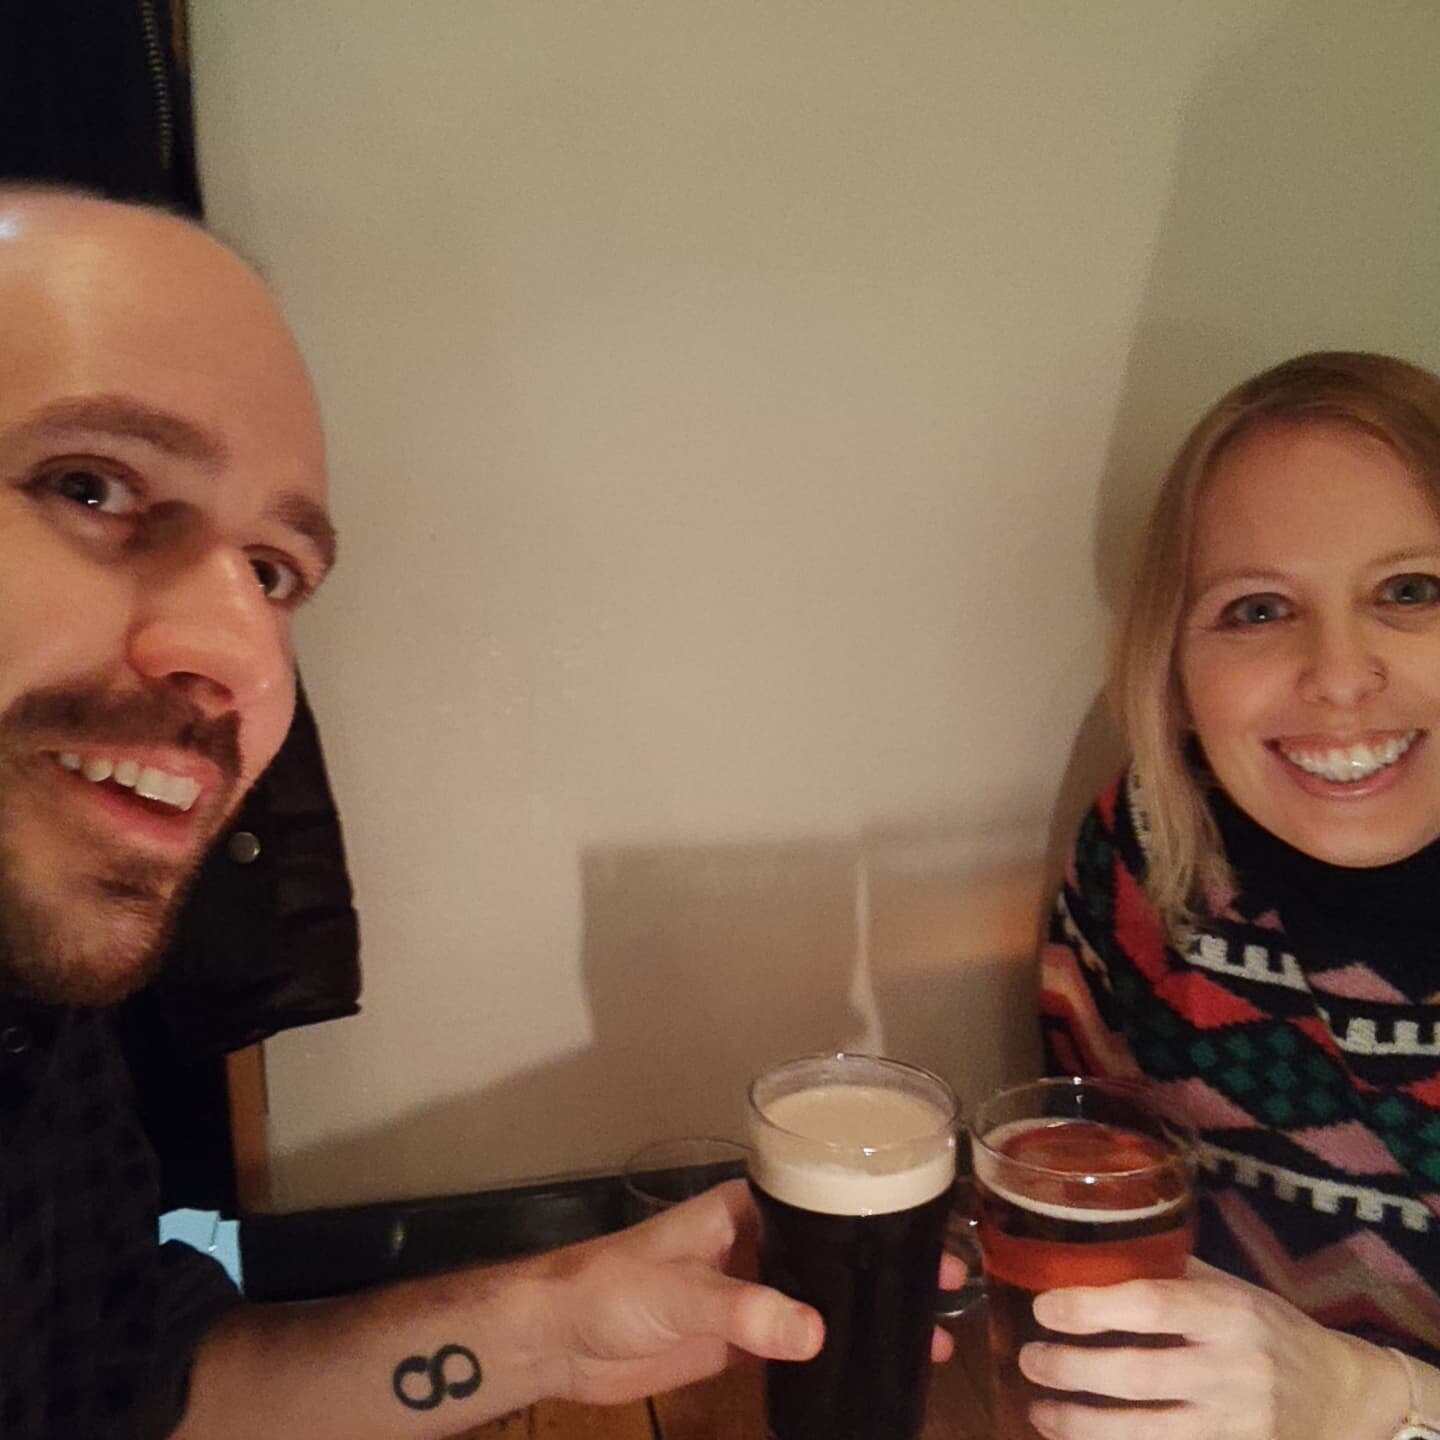 Sk&aring;l from Stockholm 🍺

#stockholm is such a beautiful city, especially at Christmas!!

It's nice to take some time to relax with my awesome husband!!

#stockholmatchristmas #stockholmjul #merrychristmas #christmaslights #julljus #christmasdrin